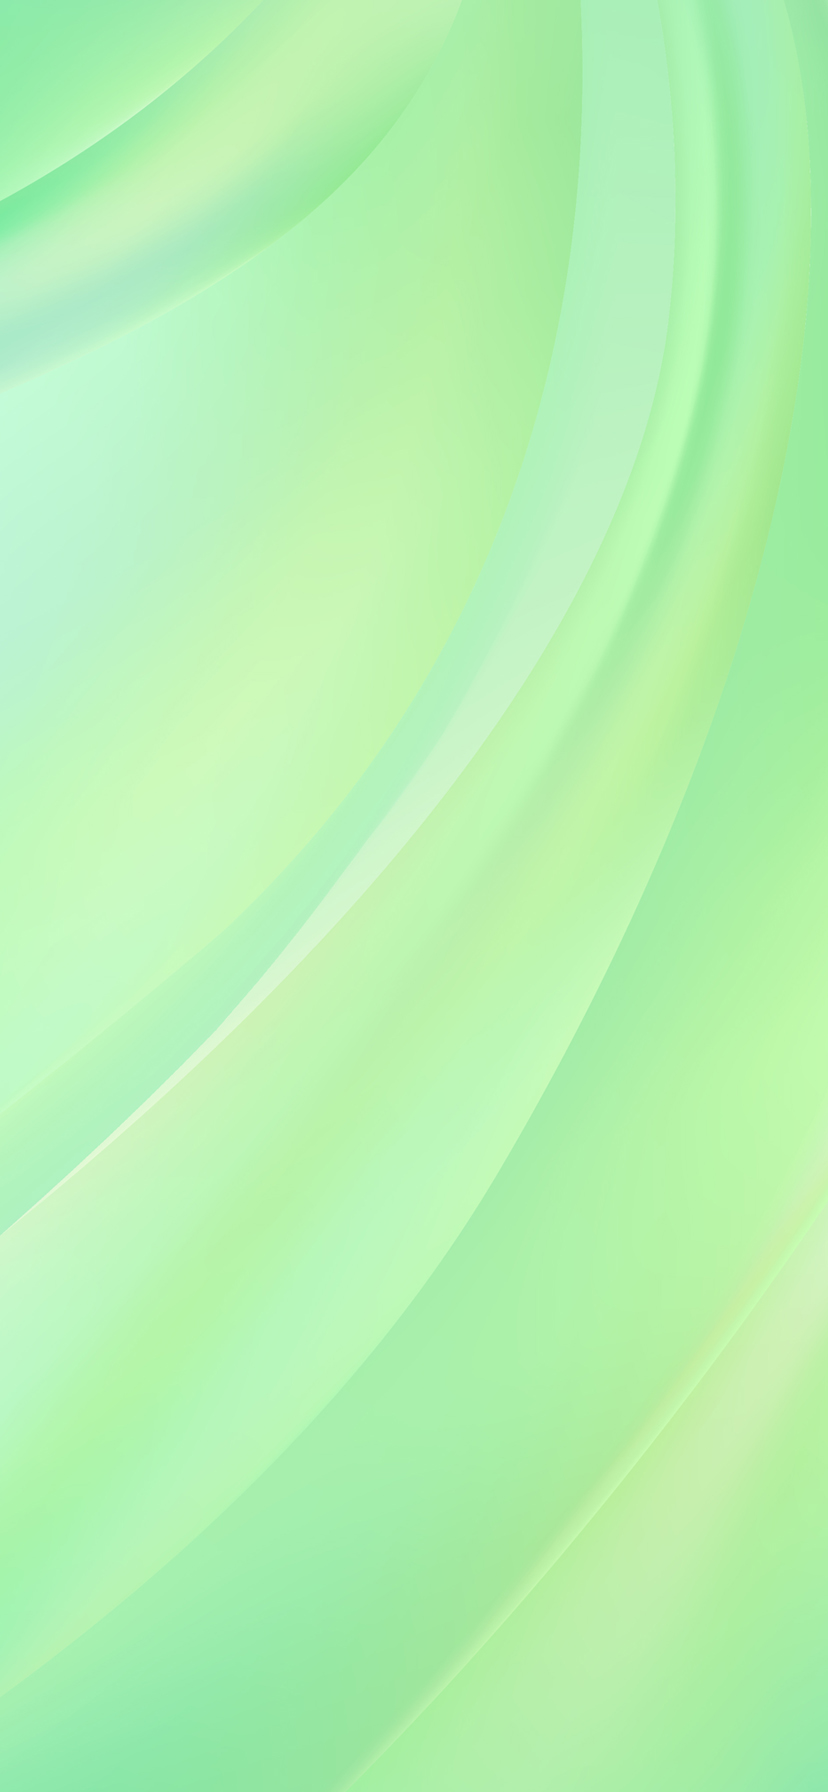 iPhone Wallpaper Of Mint Green Abstract